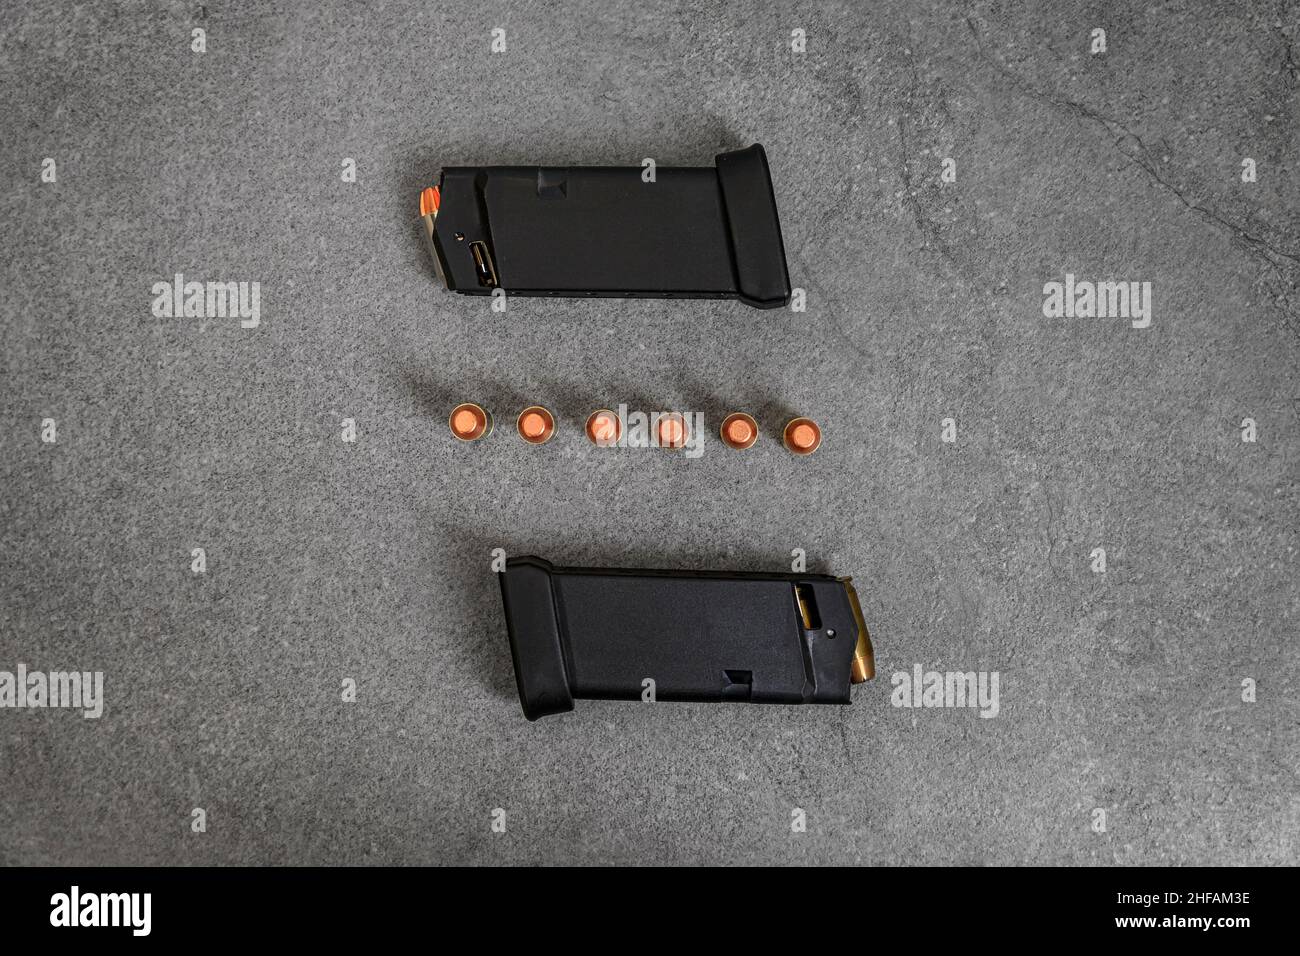 45 ACP caliber hollow point and full metal jacket bullets loaded into handgun magazines and unfired rounds lined up on a stone surface Stock Photo